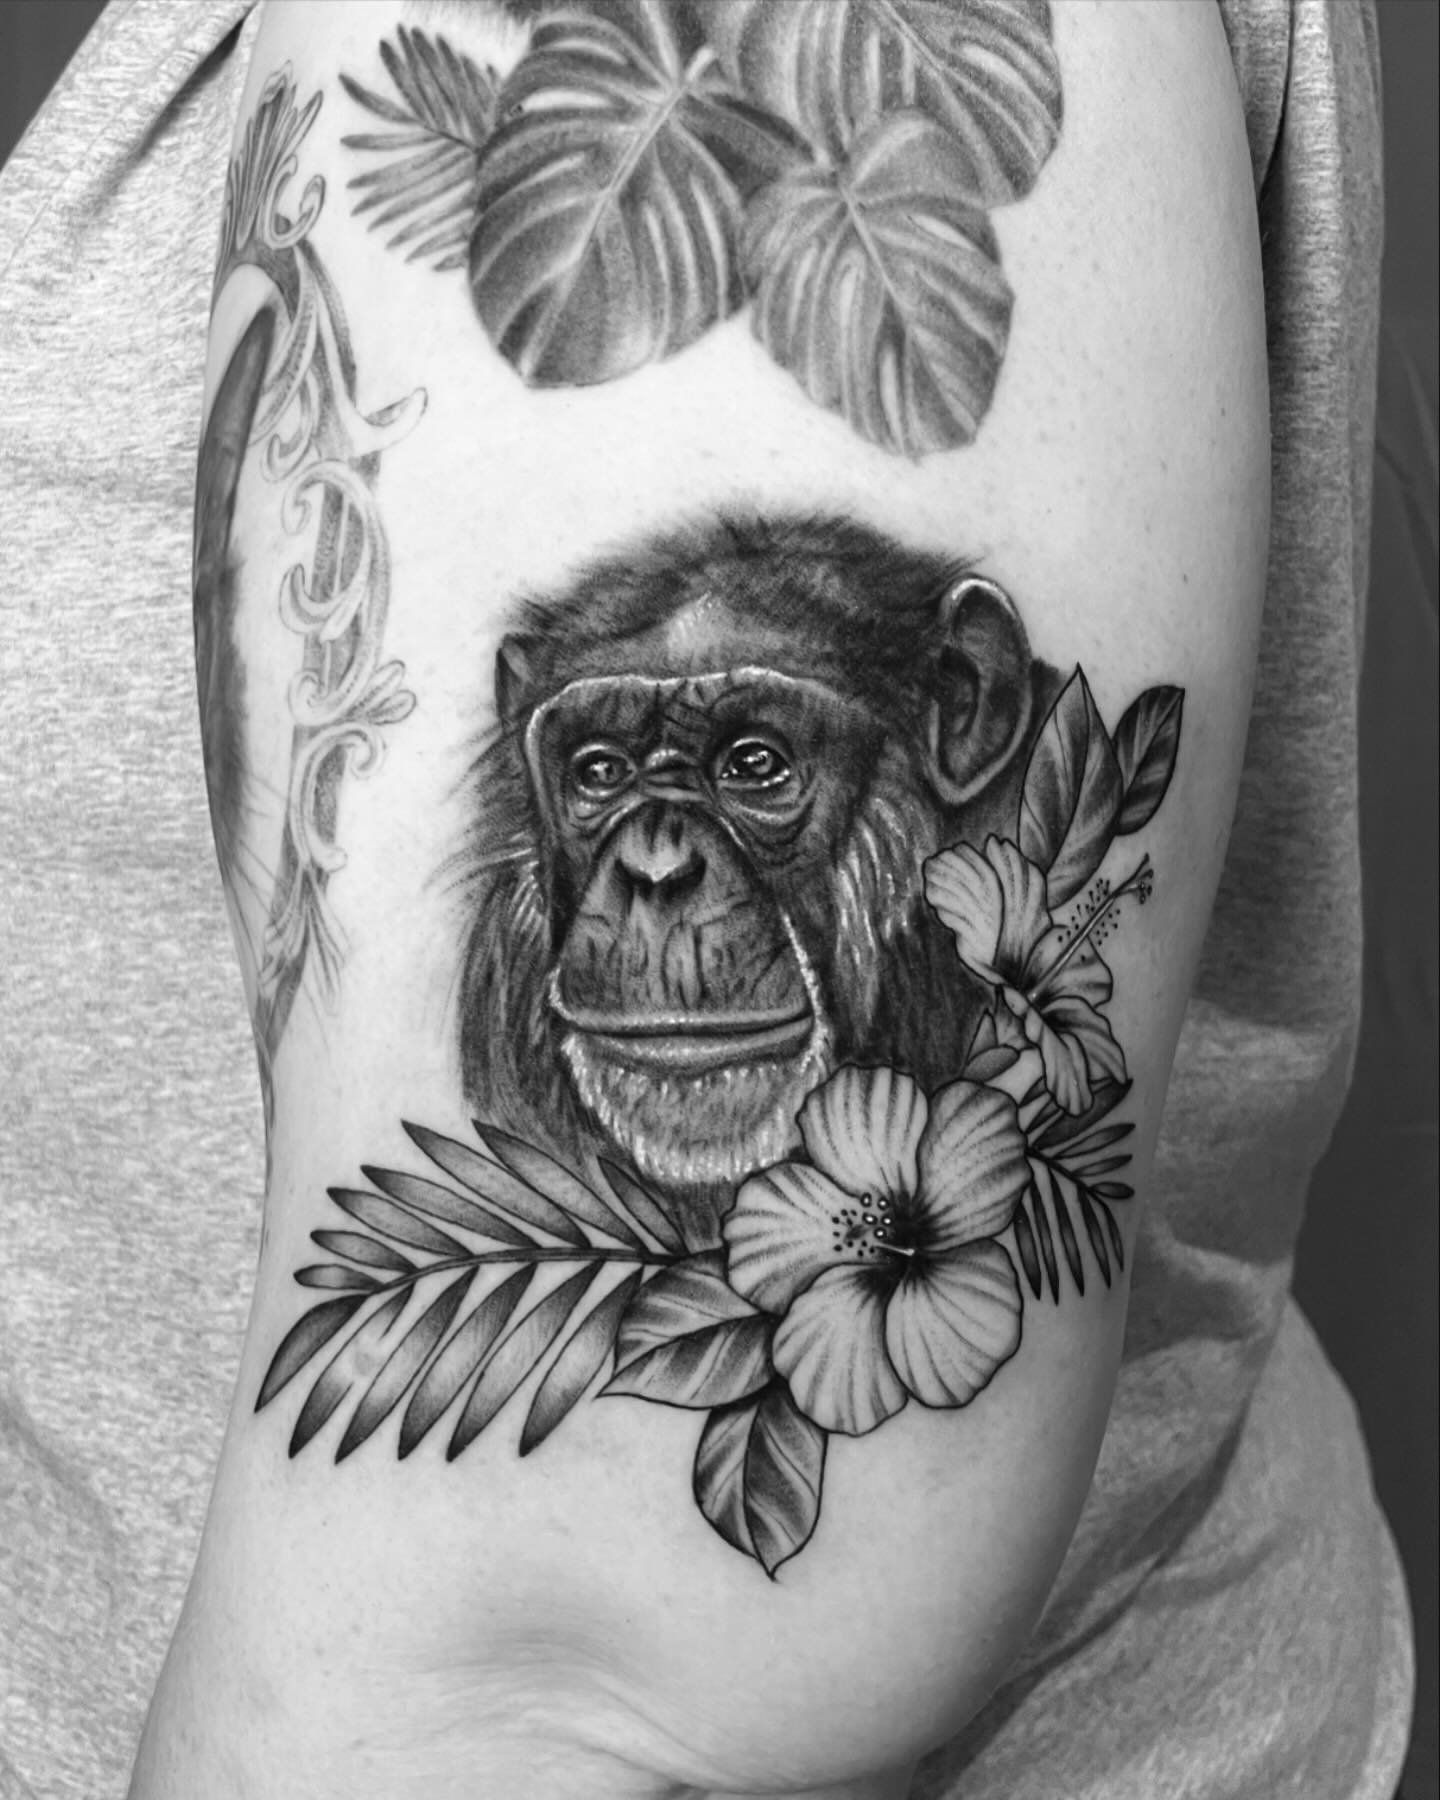 another of Jenna&rsquo;s favorite chimps, lucky! swipe to see lucky sittin under bubbles, done last year.